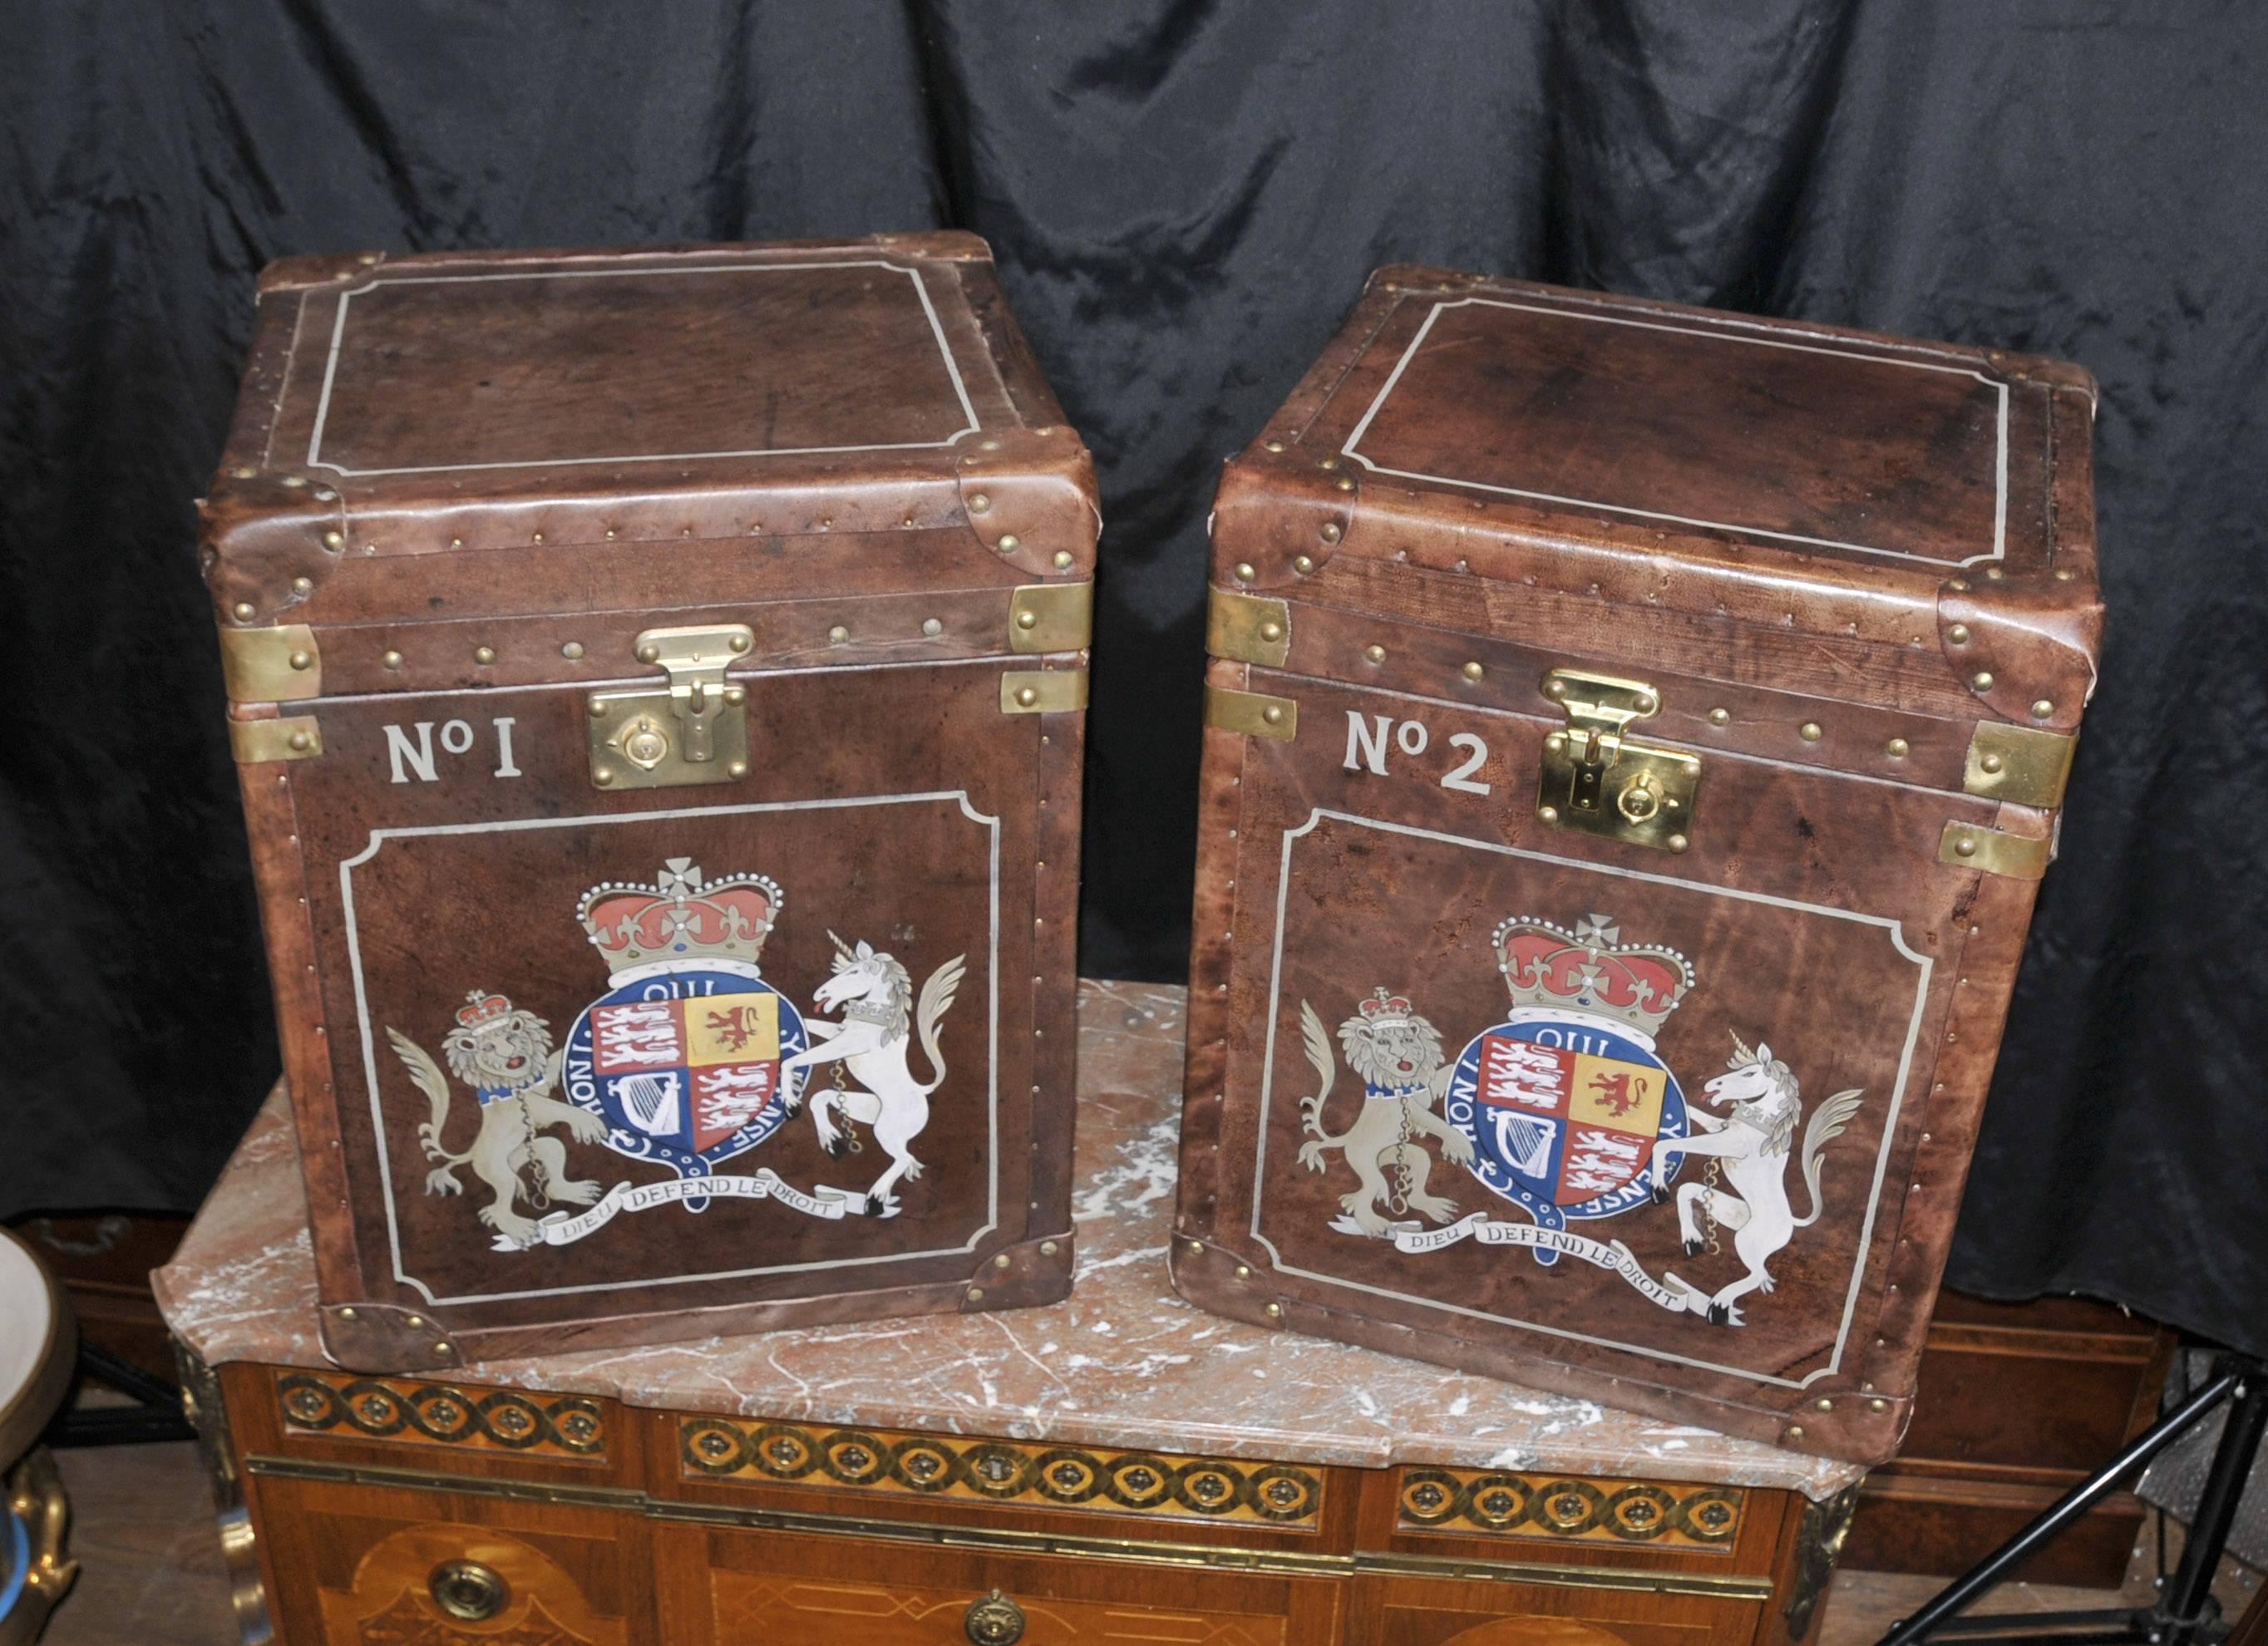 Available to view in the Canonbury Antiques Hertfordshire showroom, just 25 minutes north of London.
Gorgeous pair of English steamer trunk luggage boxes.
Also make great side or coffee tables.
Lovely pair with hand-painted griffin and lion